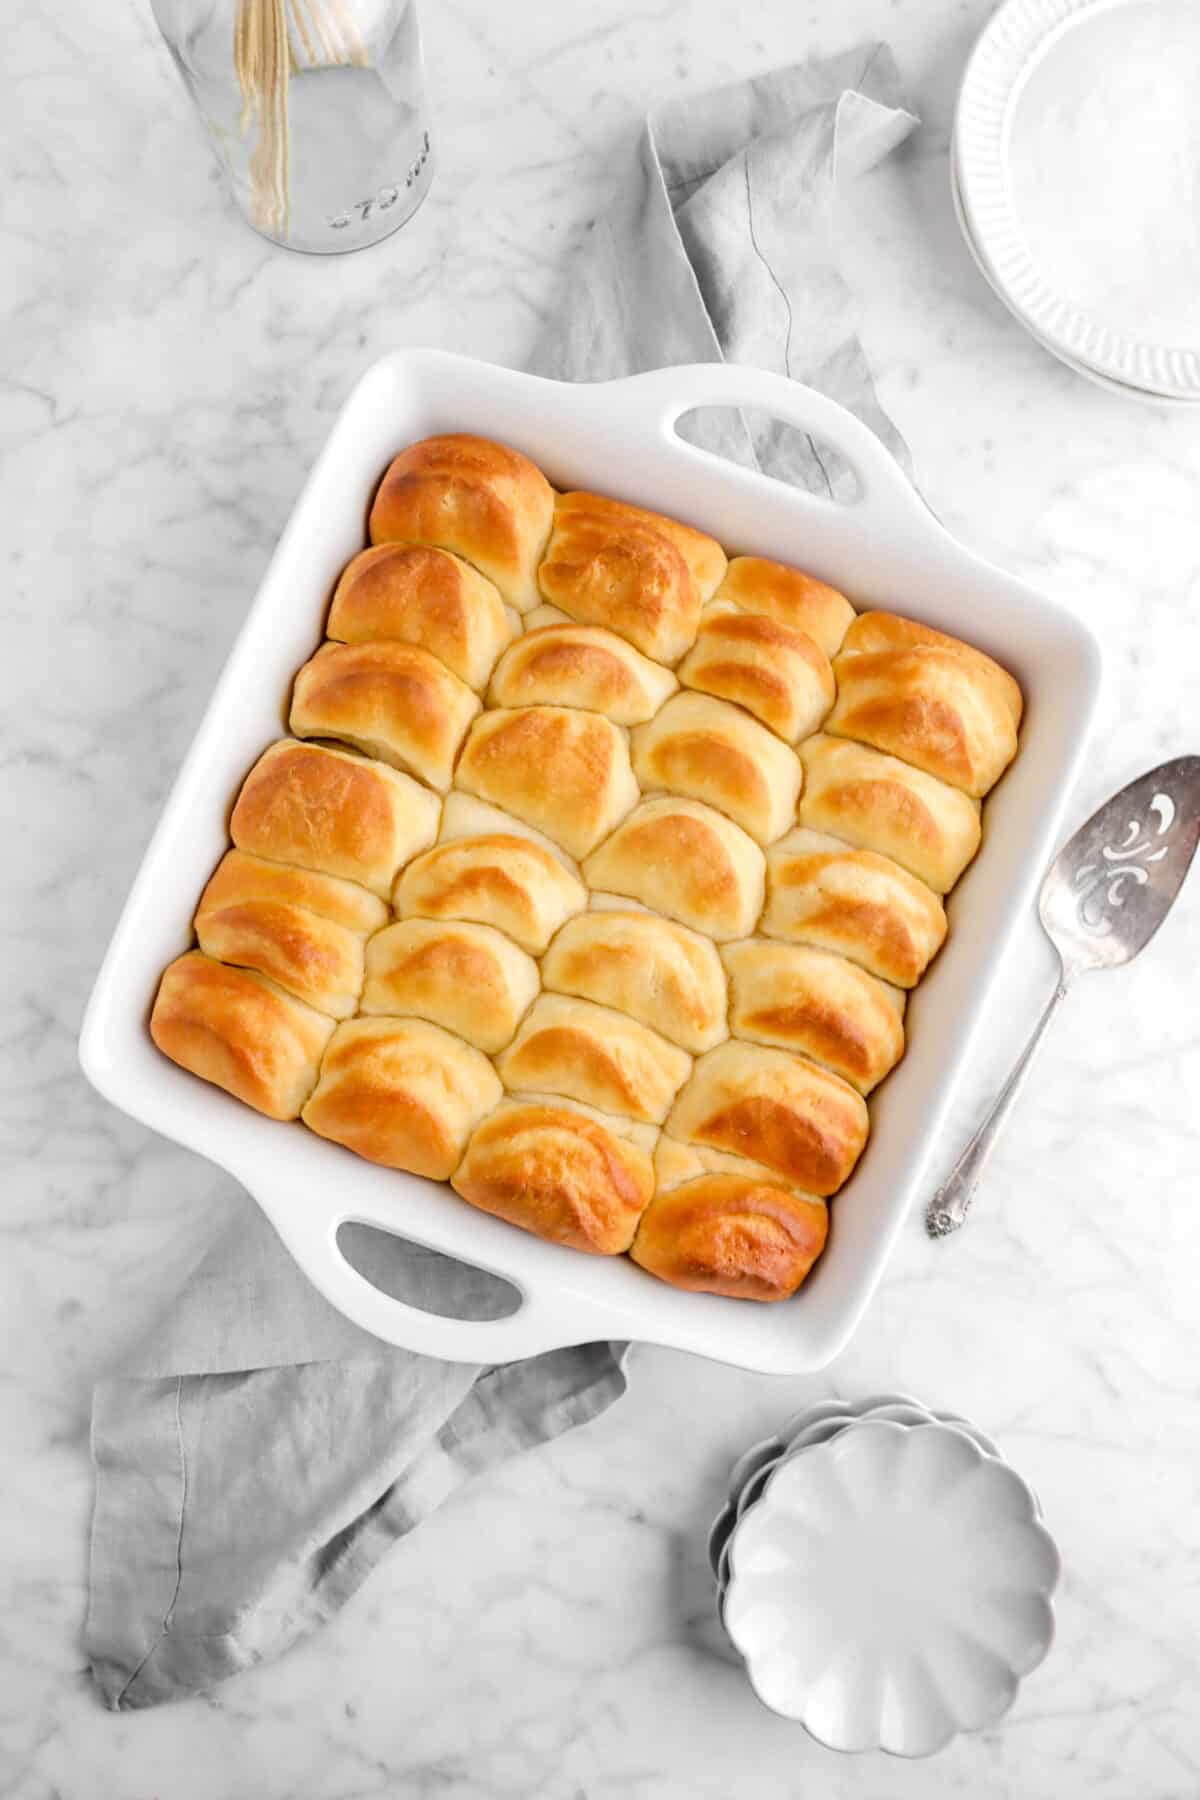 square casserole of rolls on grey towel with plates and cake knife